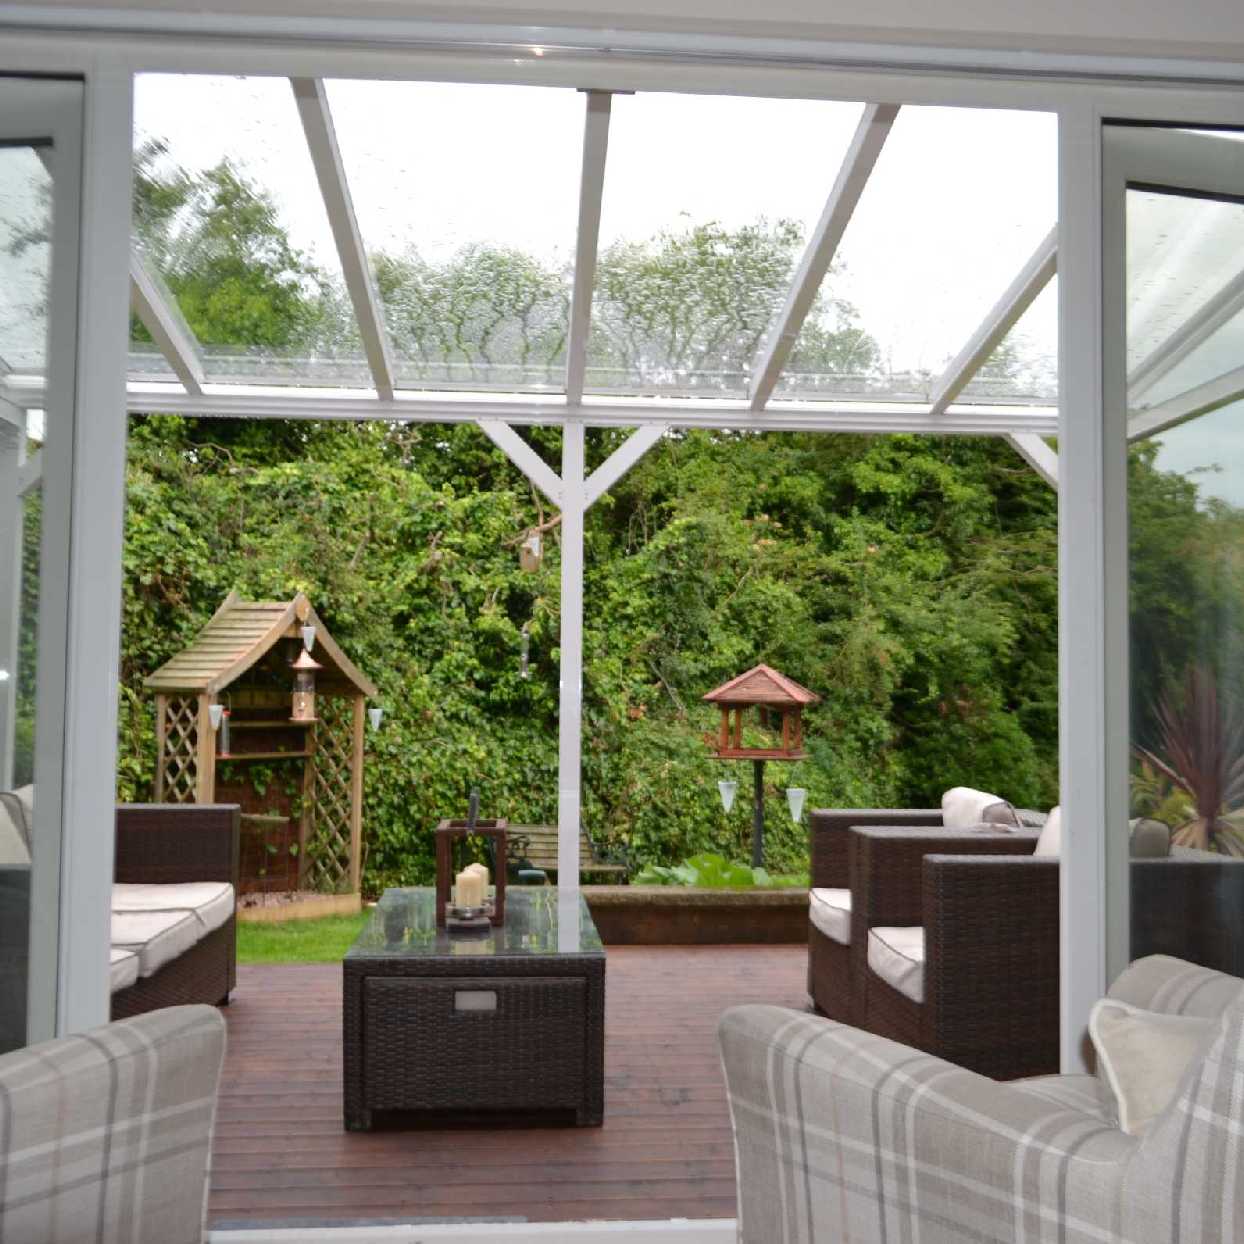 Great selection of Omega Smart Lean-To Canopy, White UNGLAZED for 6mm Glazing - 7.0m (W) x 2.5m (P), (4) Supporting Posts